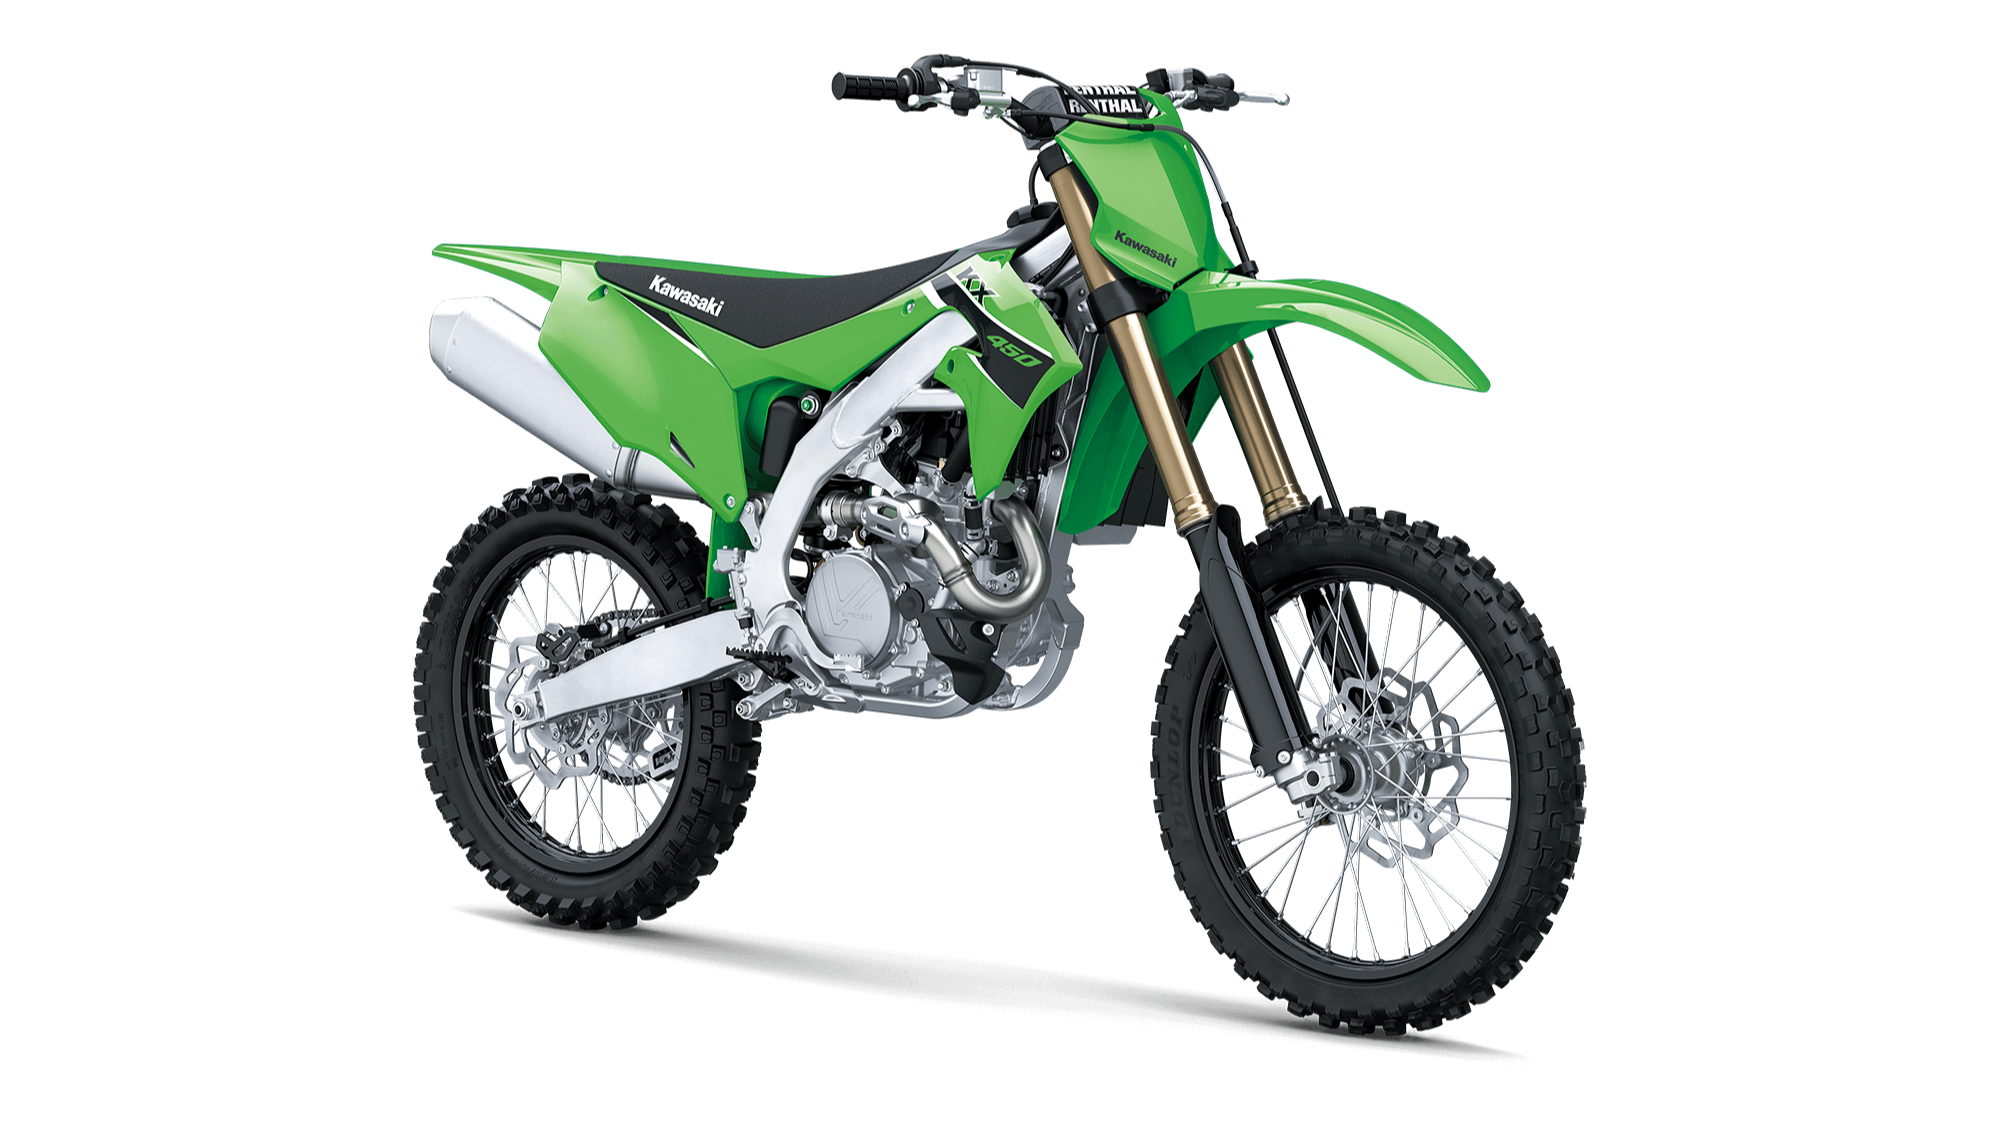 KX™450:LEARN MORE